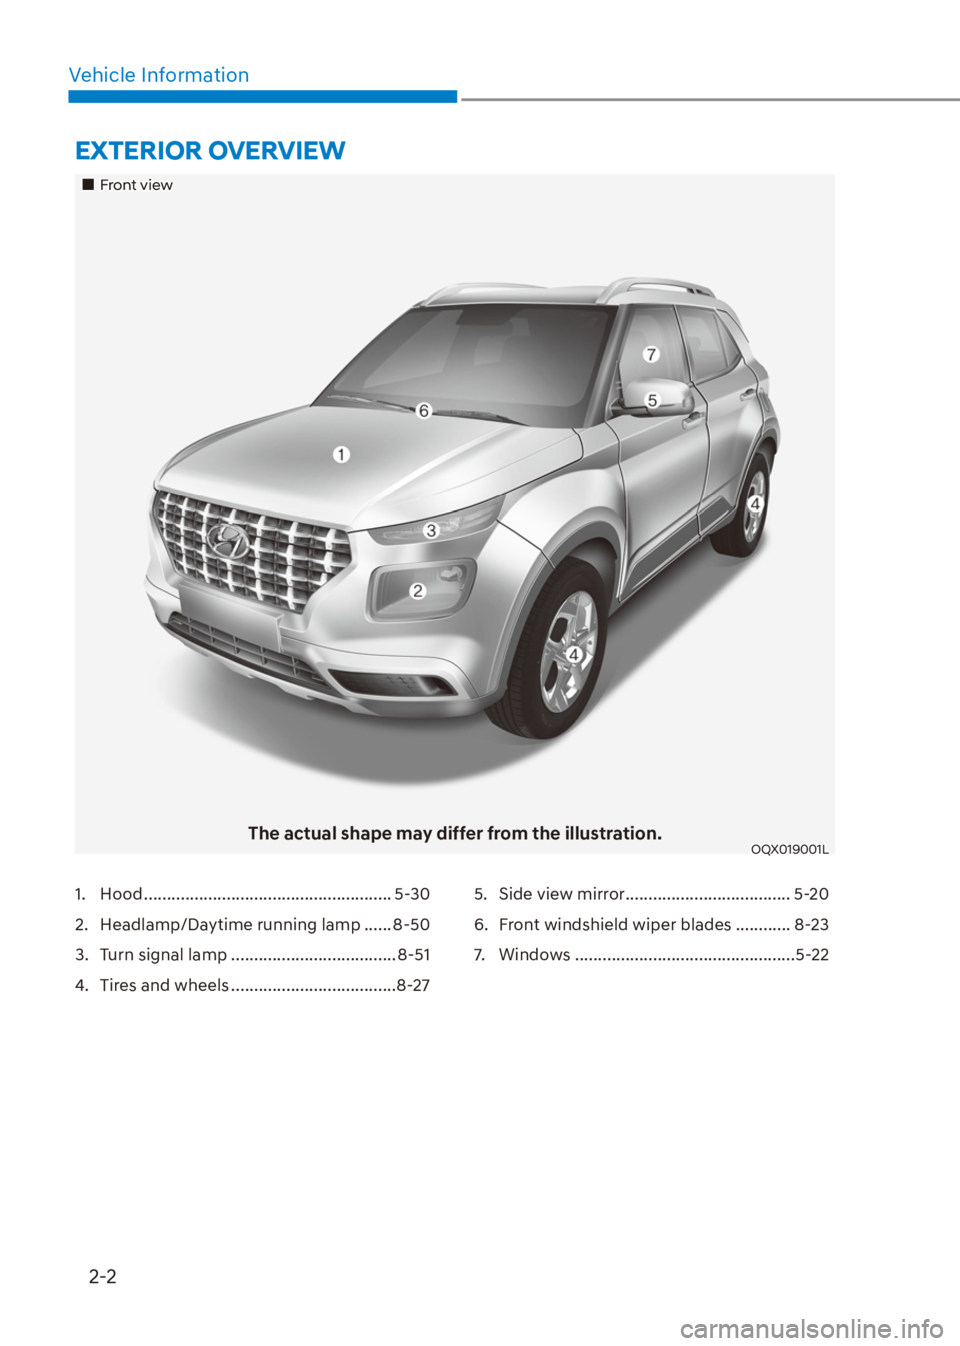 HYUNDAI VENUE 2022  Owners Manual 2-2
Vehicle Information
EXTERIOR OVERVIEW
��„Front view
The actual shape may differ from the illustration.OQX019001L
1. Hood ...................................................... 5-30
2.  Headlamp